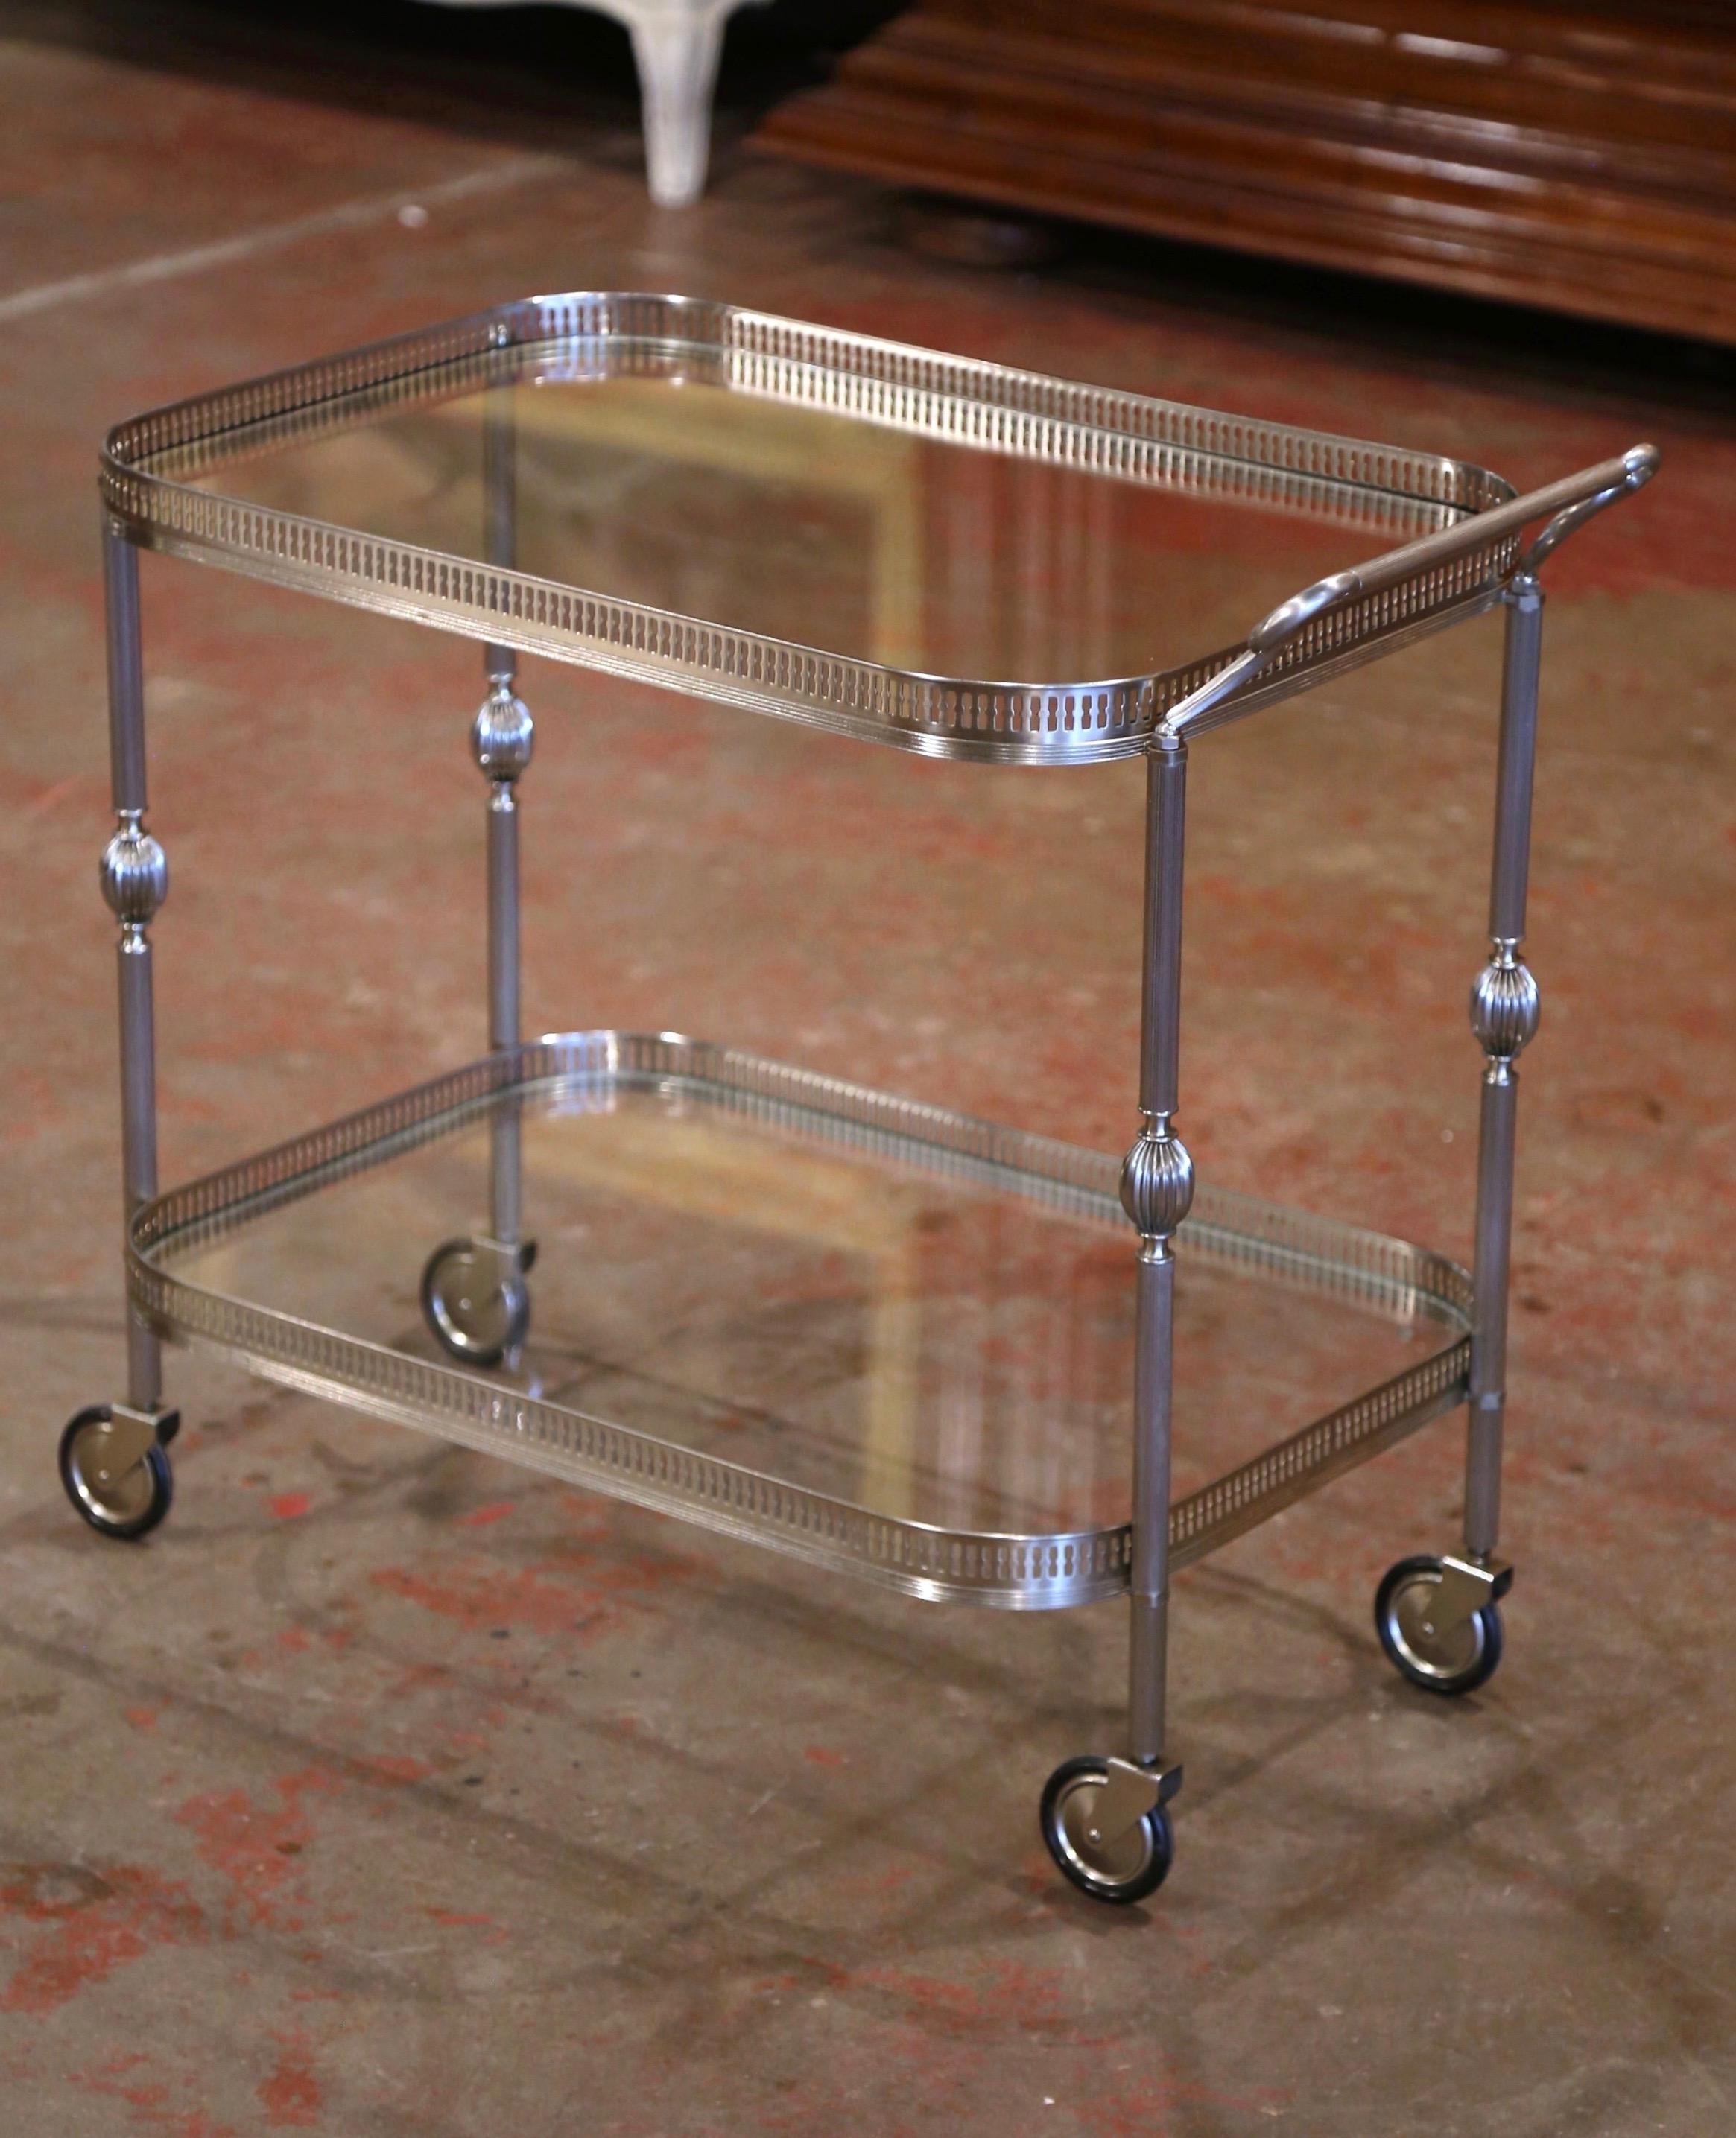 Art Deco Mid-20th Century French Silvered and Glass Desert Table or Bar Cart on Wheels